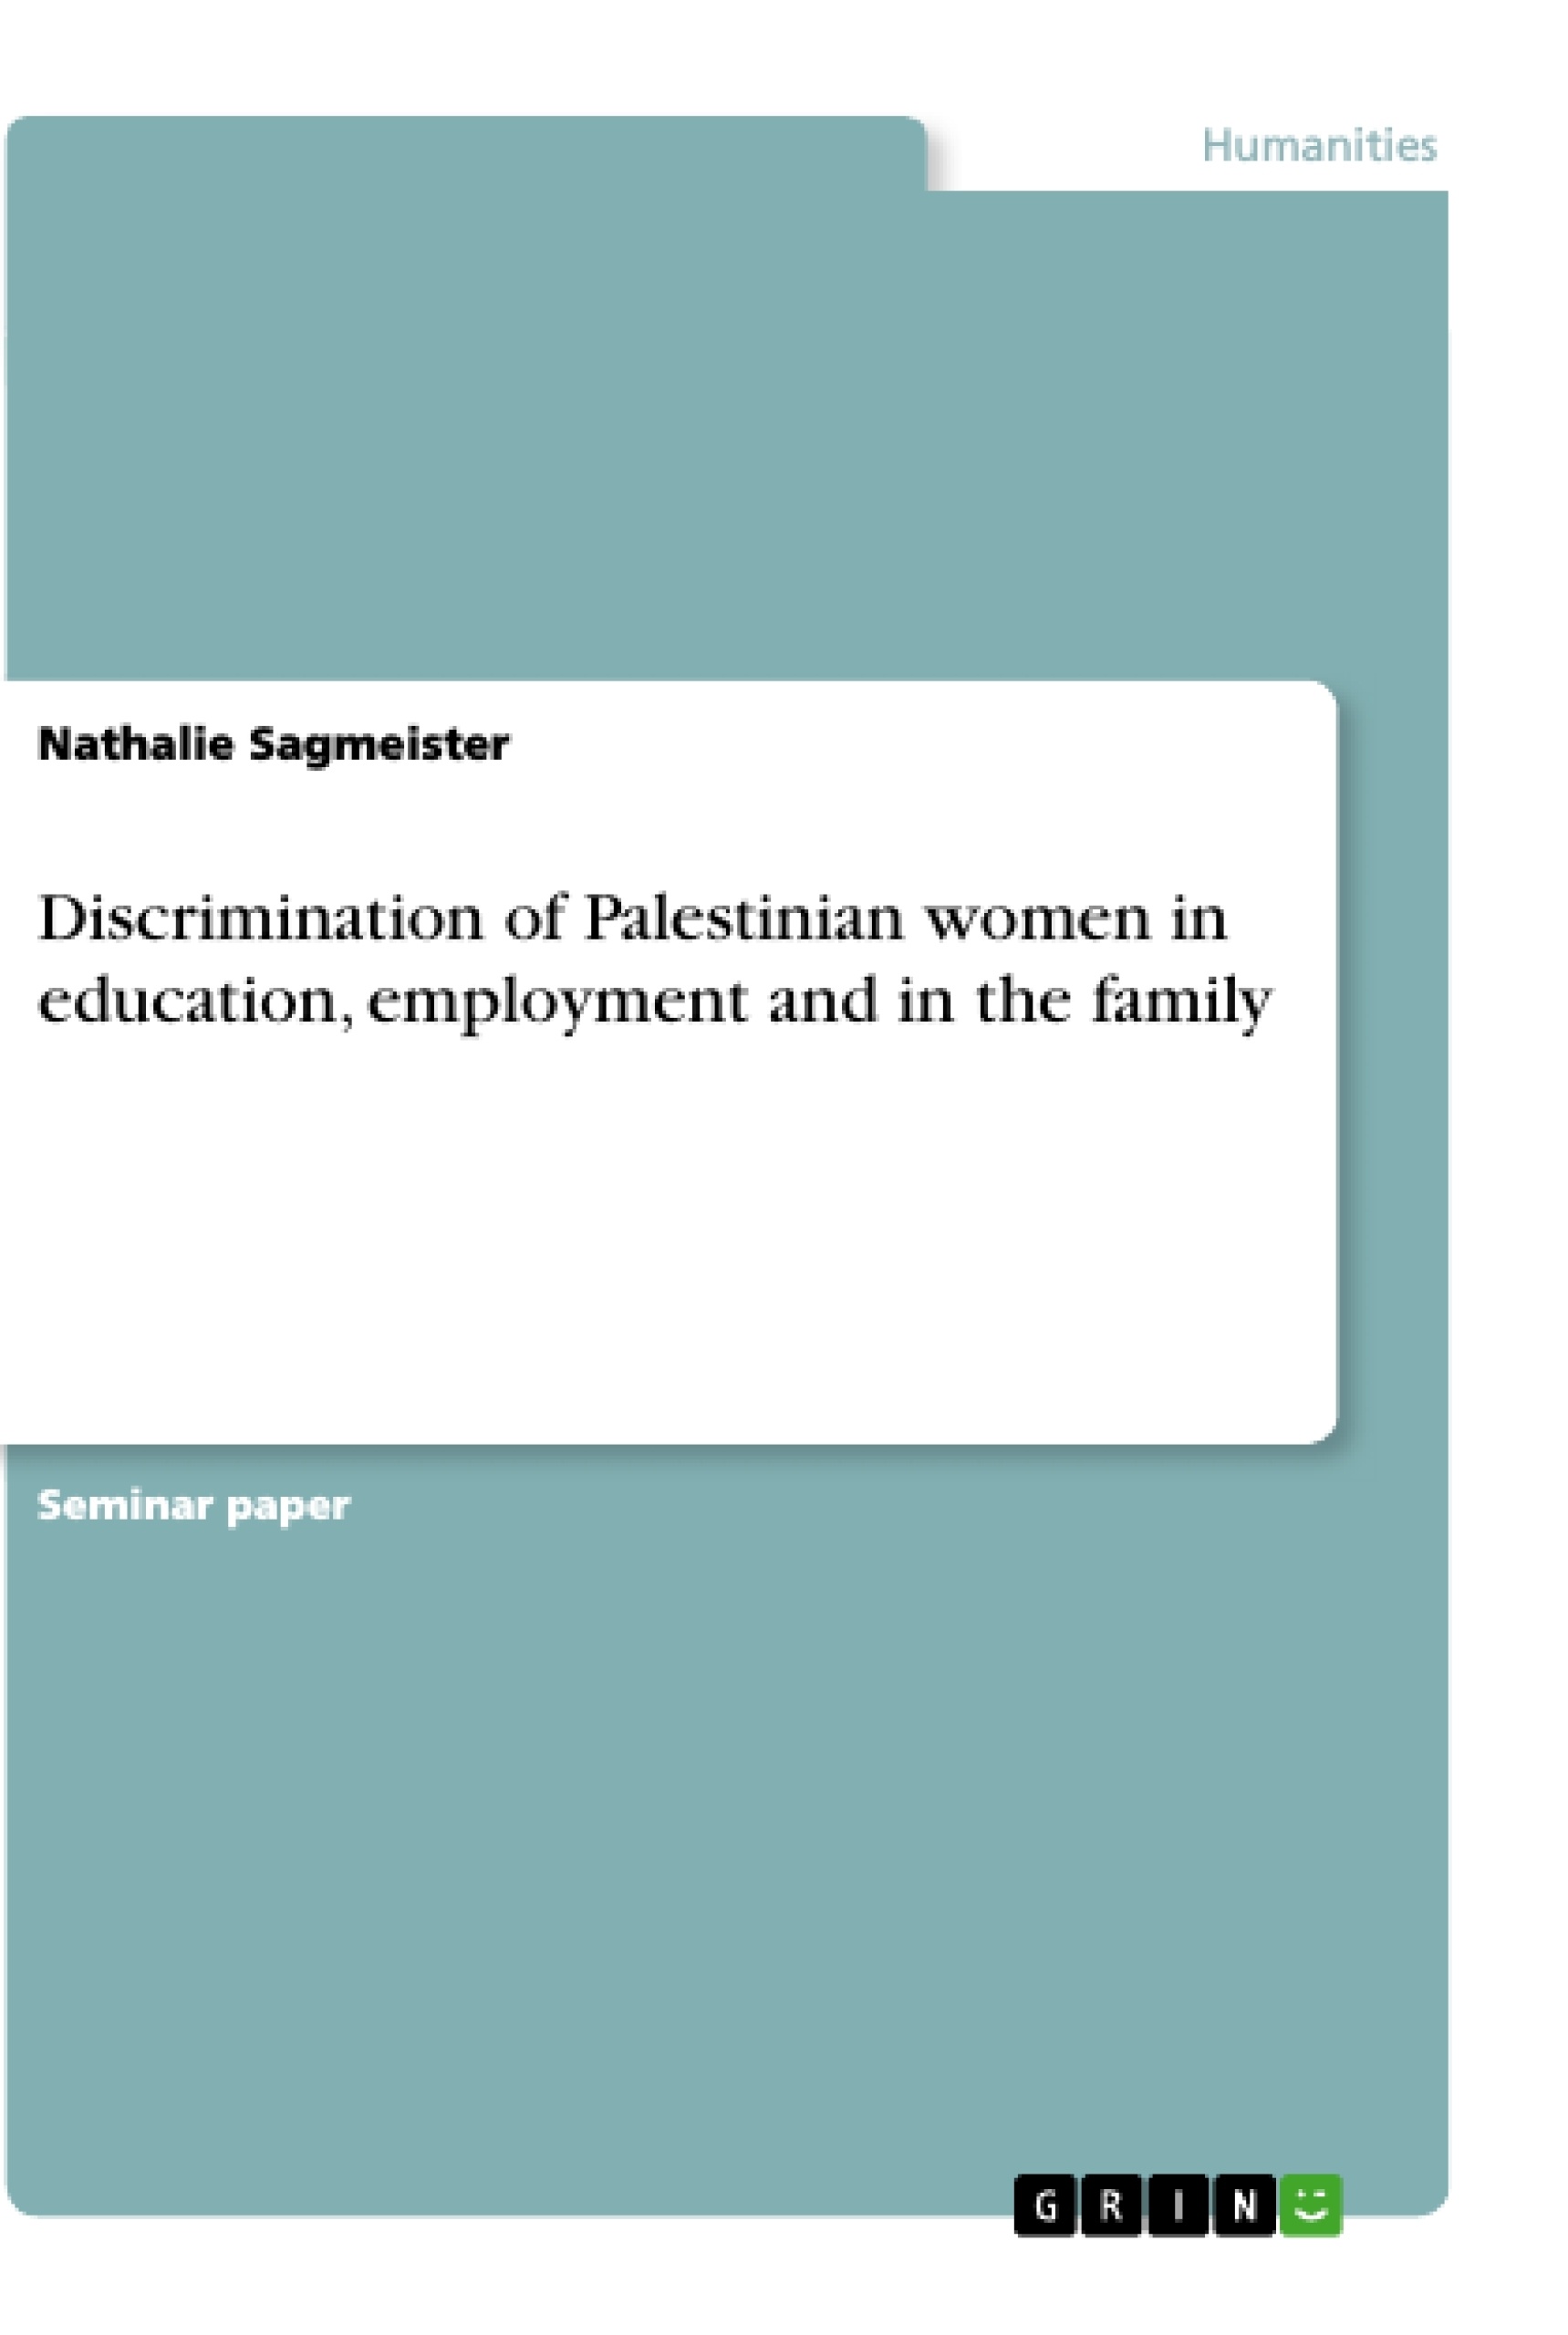 Titre: Discrimination of Palestinian women in education, employment and in the family